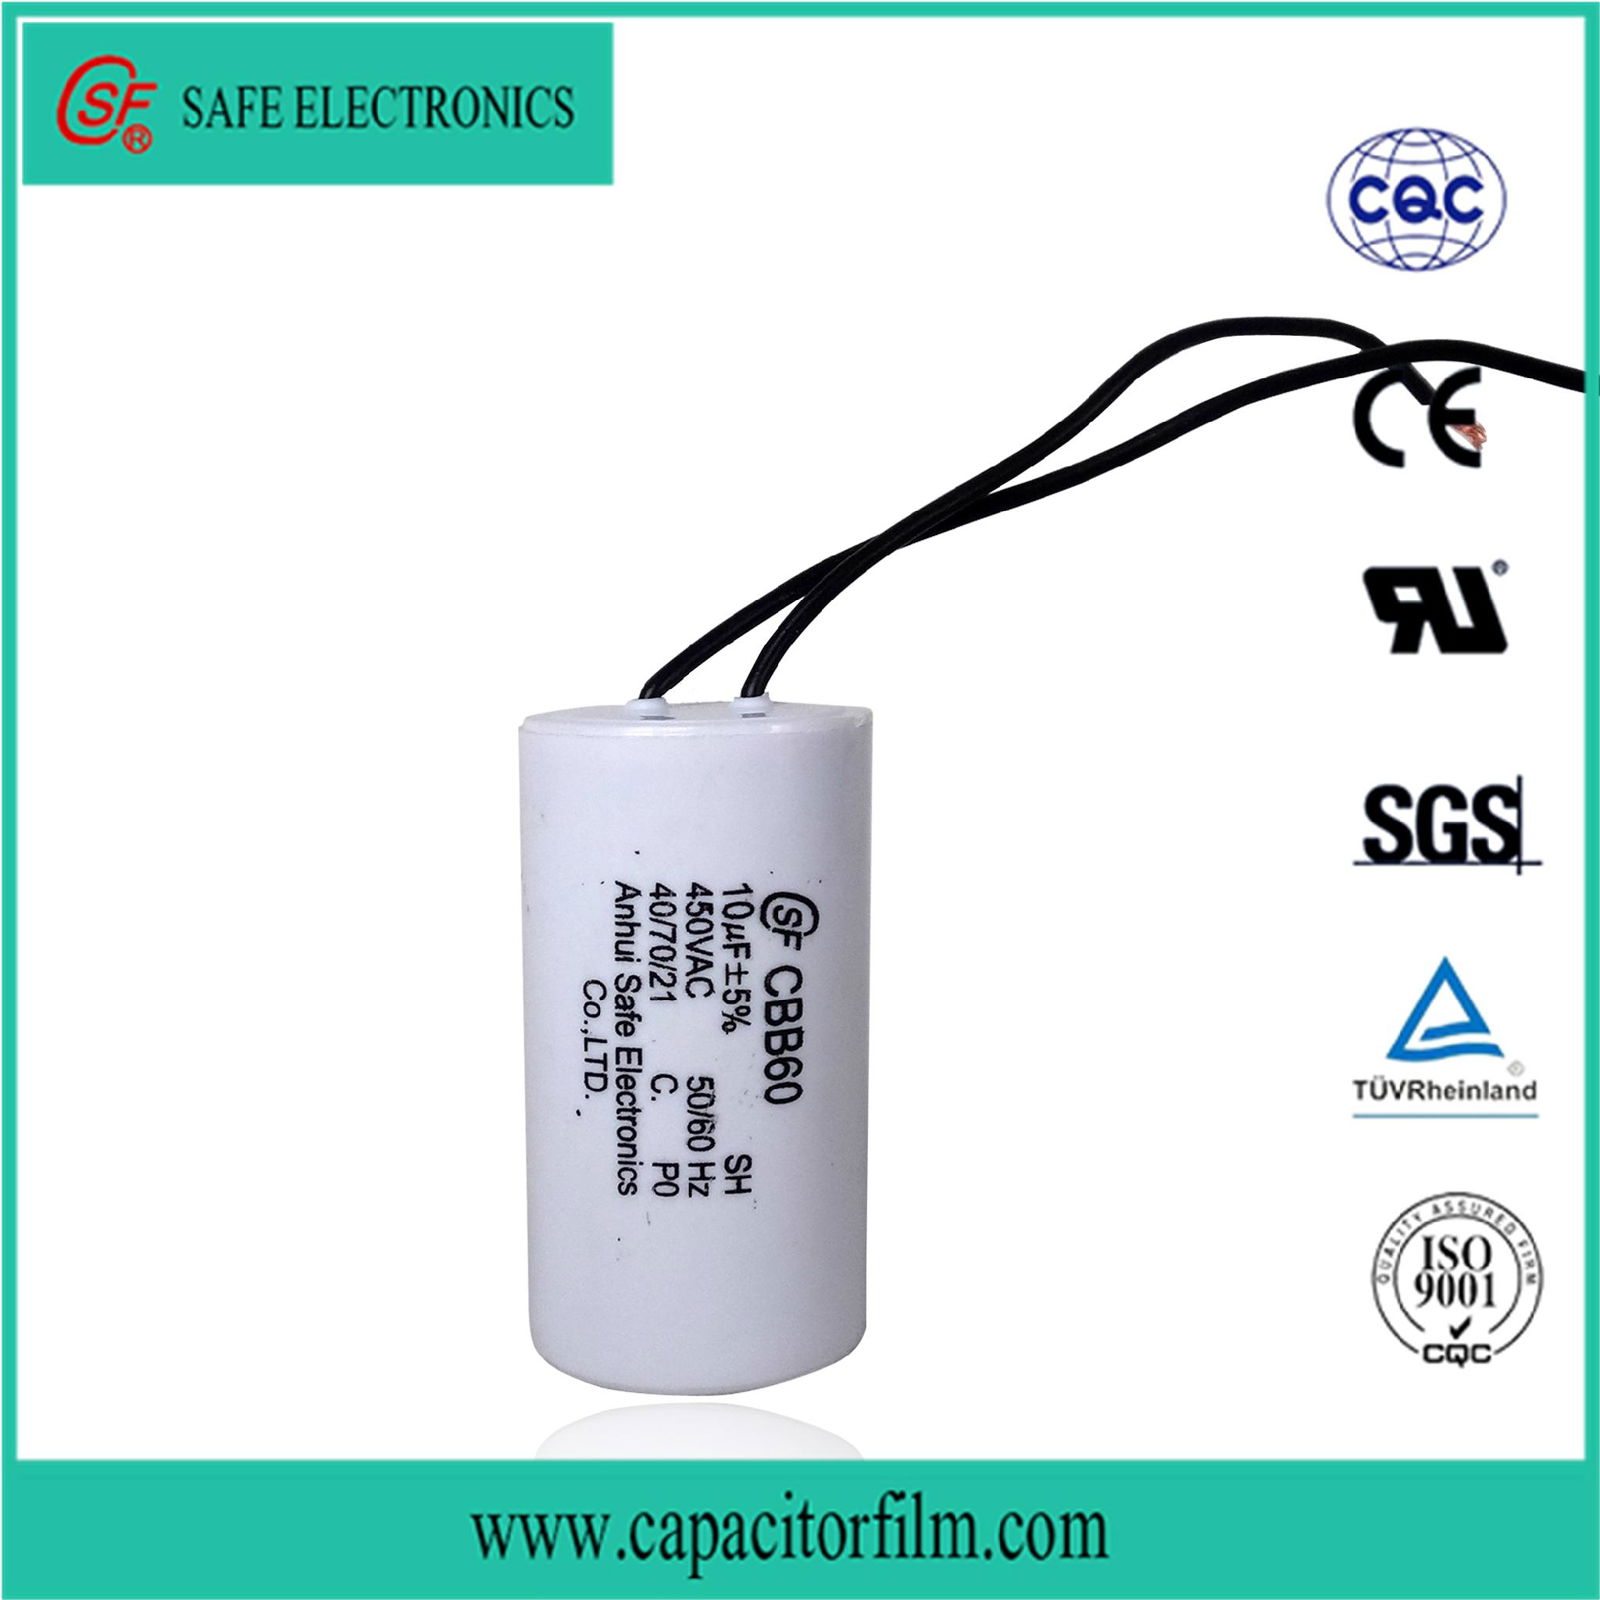 High insolation resistance motor cbb60 capacitor with ISO9001 ROHS 5